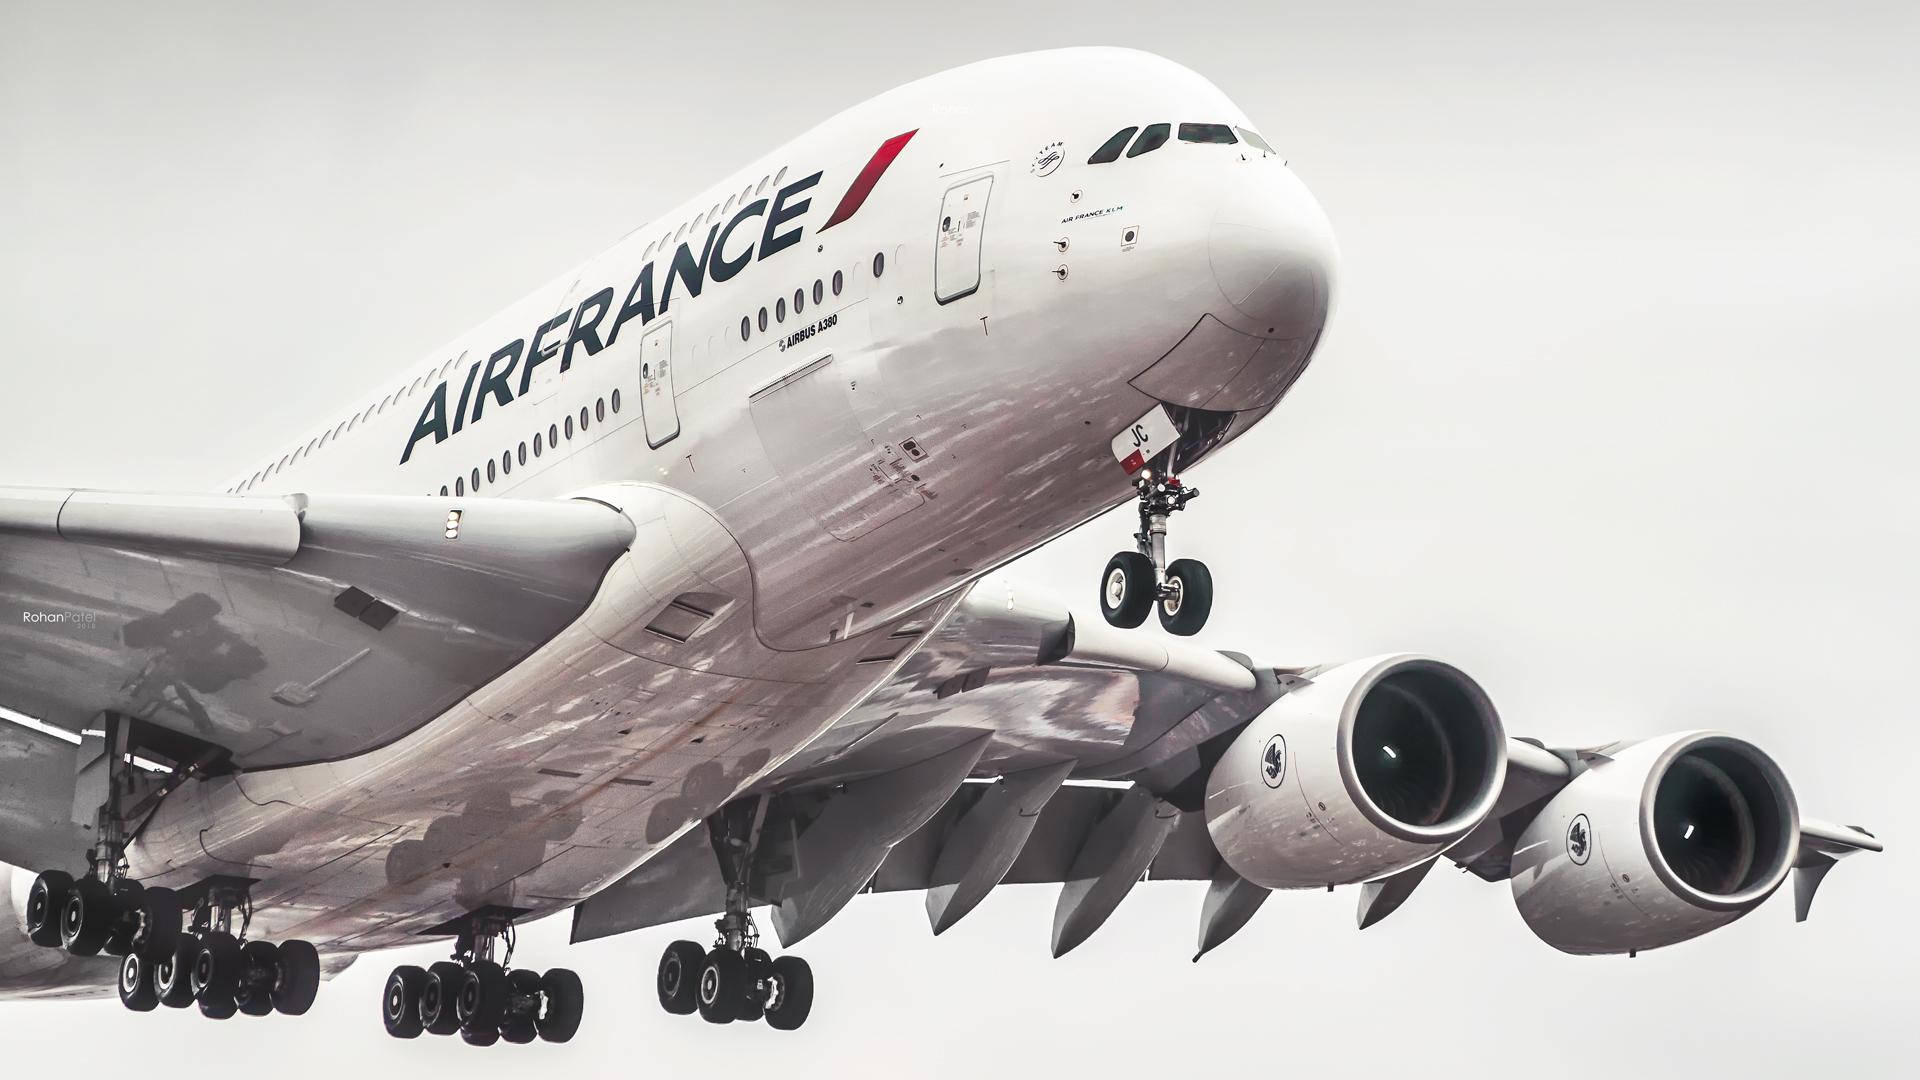 Free Air France Wallpaper Downloads, [100+] Air France Wallpapers for FREE  